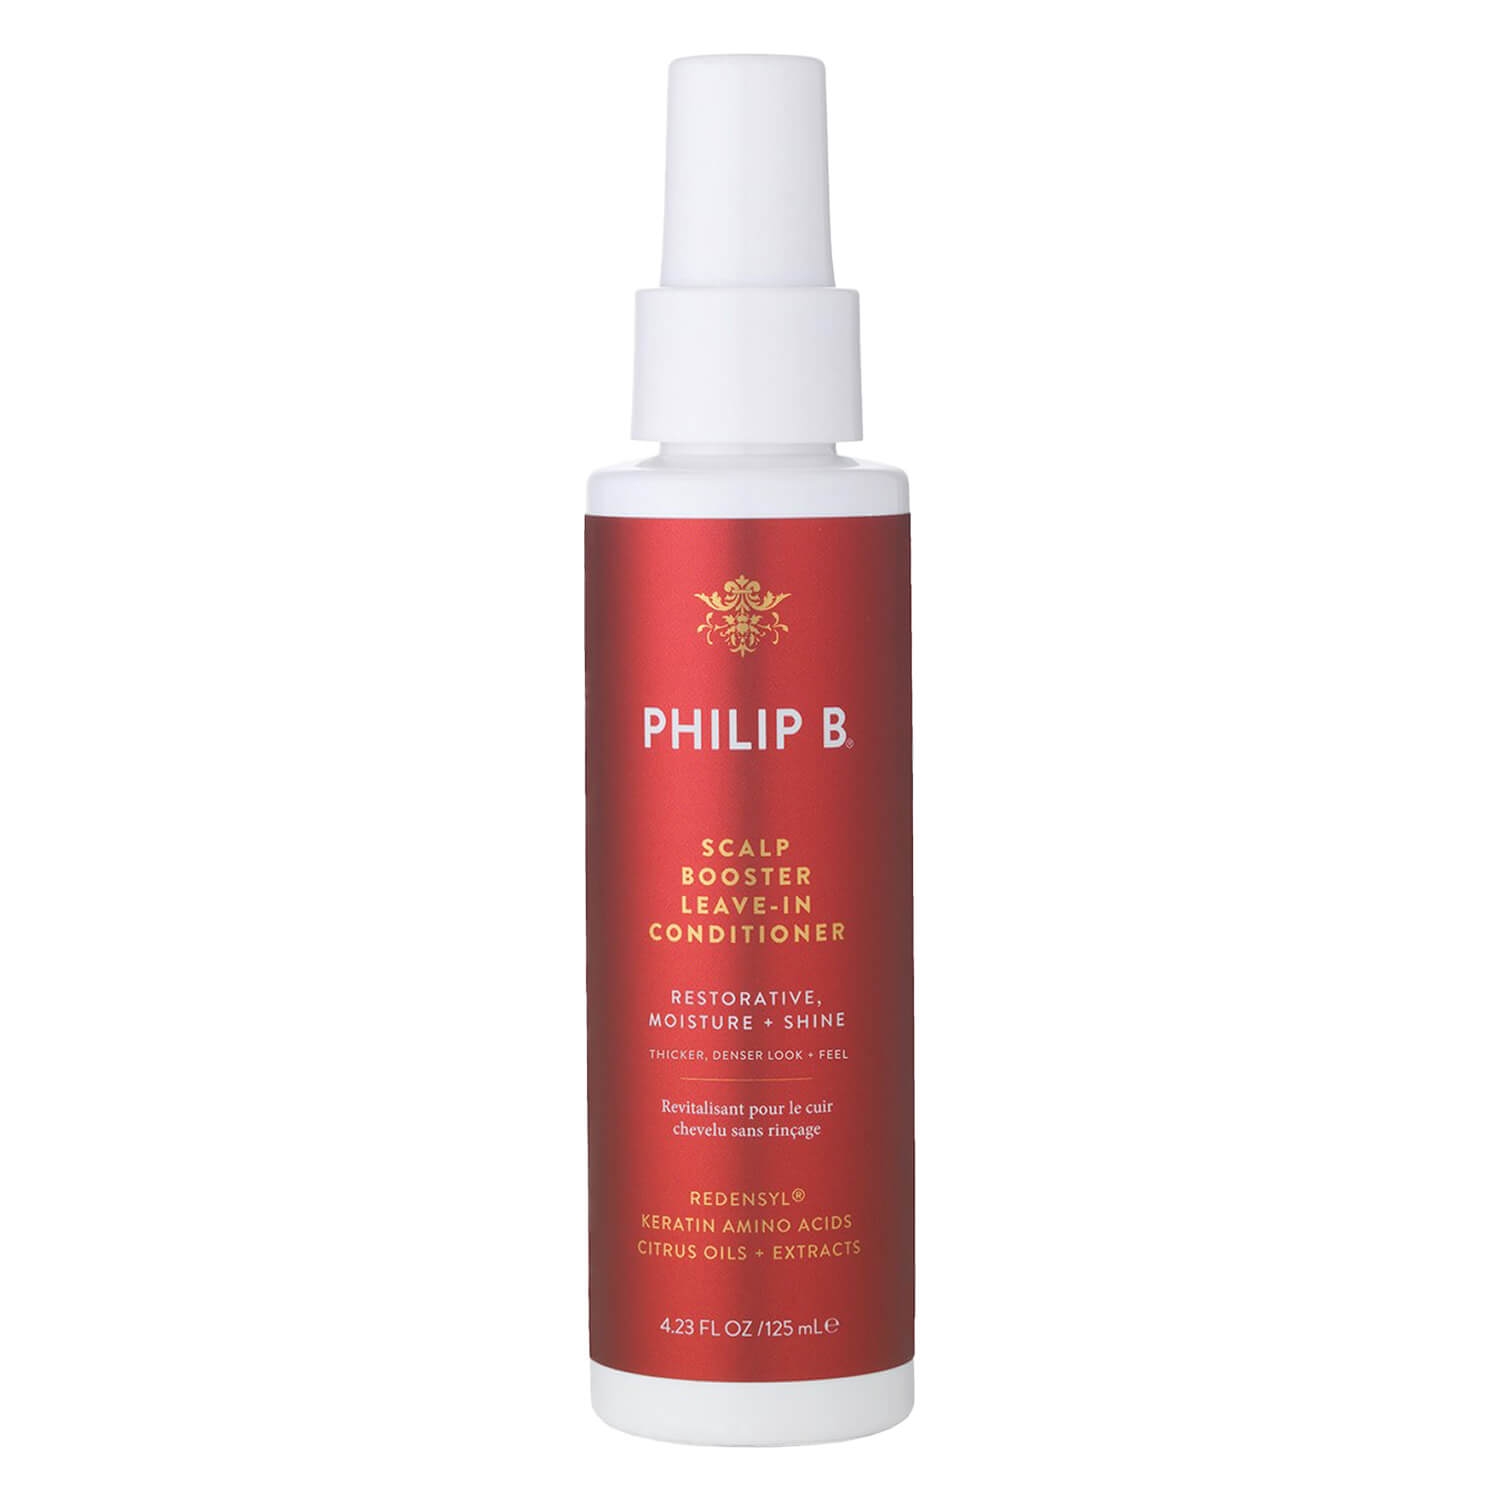 Product image from Philip B - Scalp Booster Leave-In Conditioner